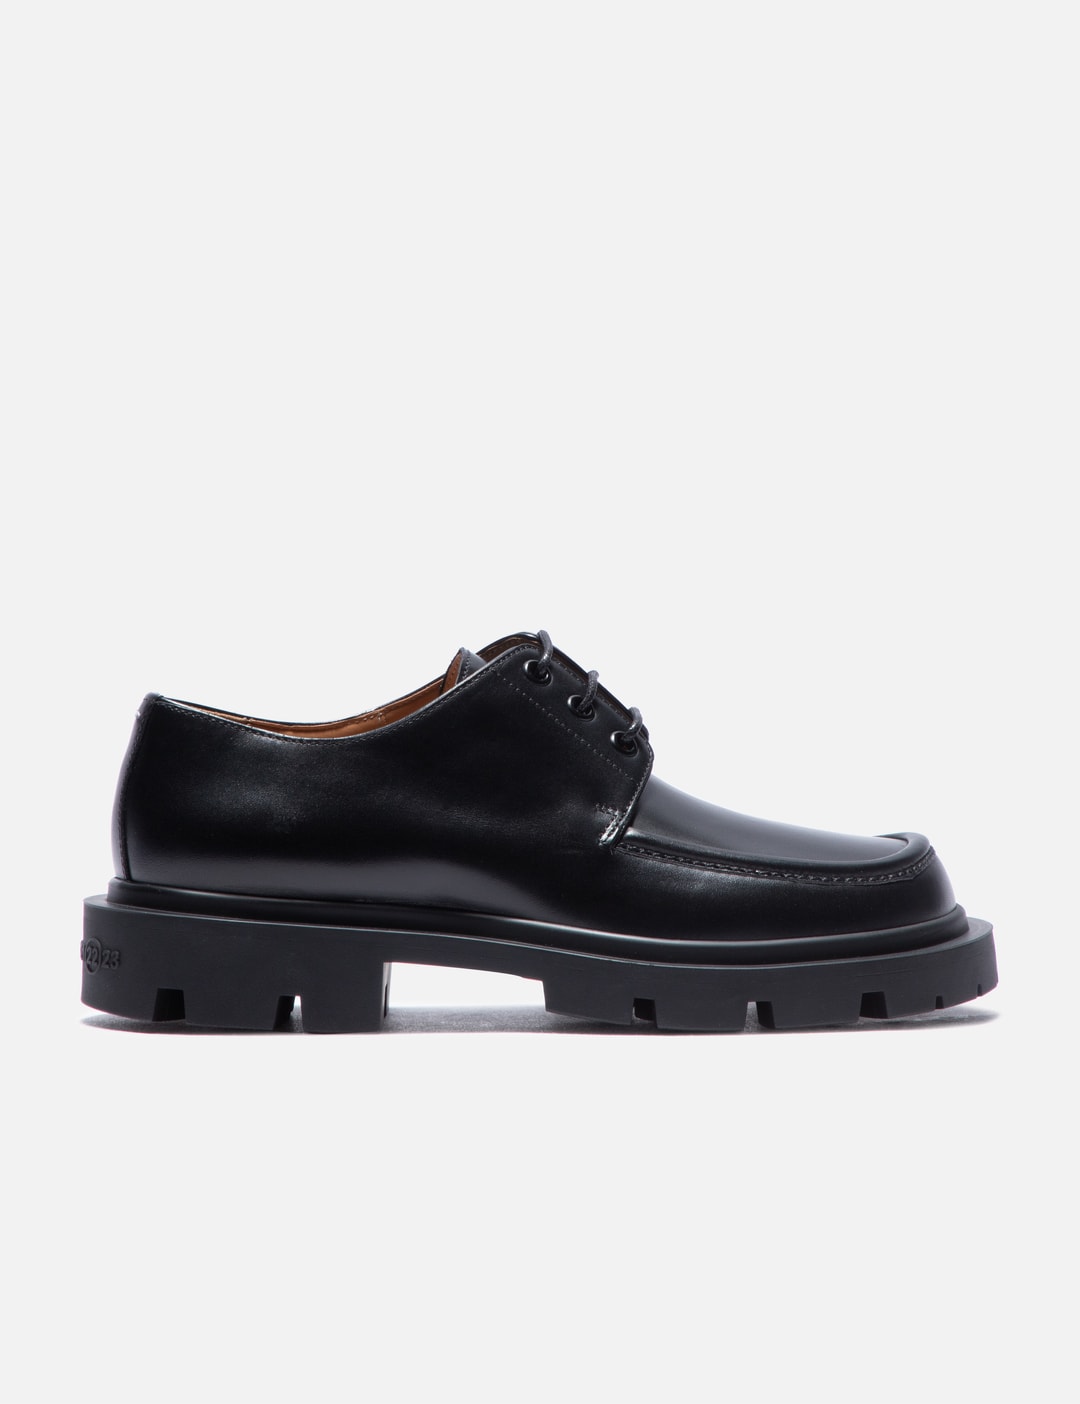 Maison Margiela - Ivy Derbies | HBX - Globally Curated Fashion and ...